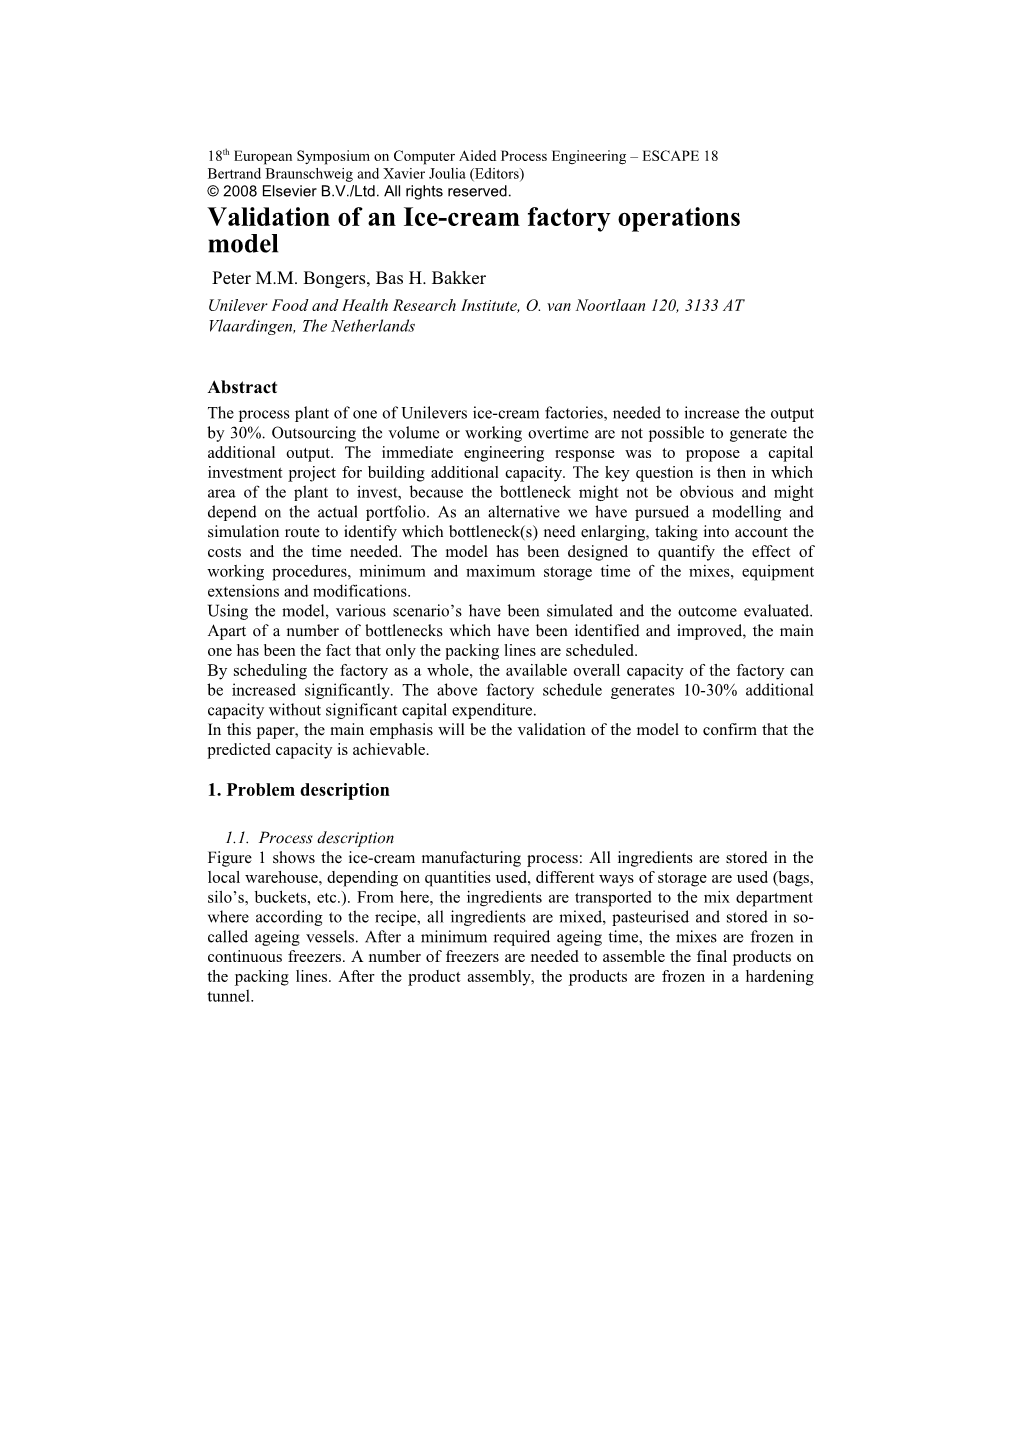 Validation of an Ice-Cream Factory Operations Model